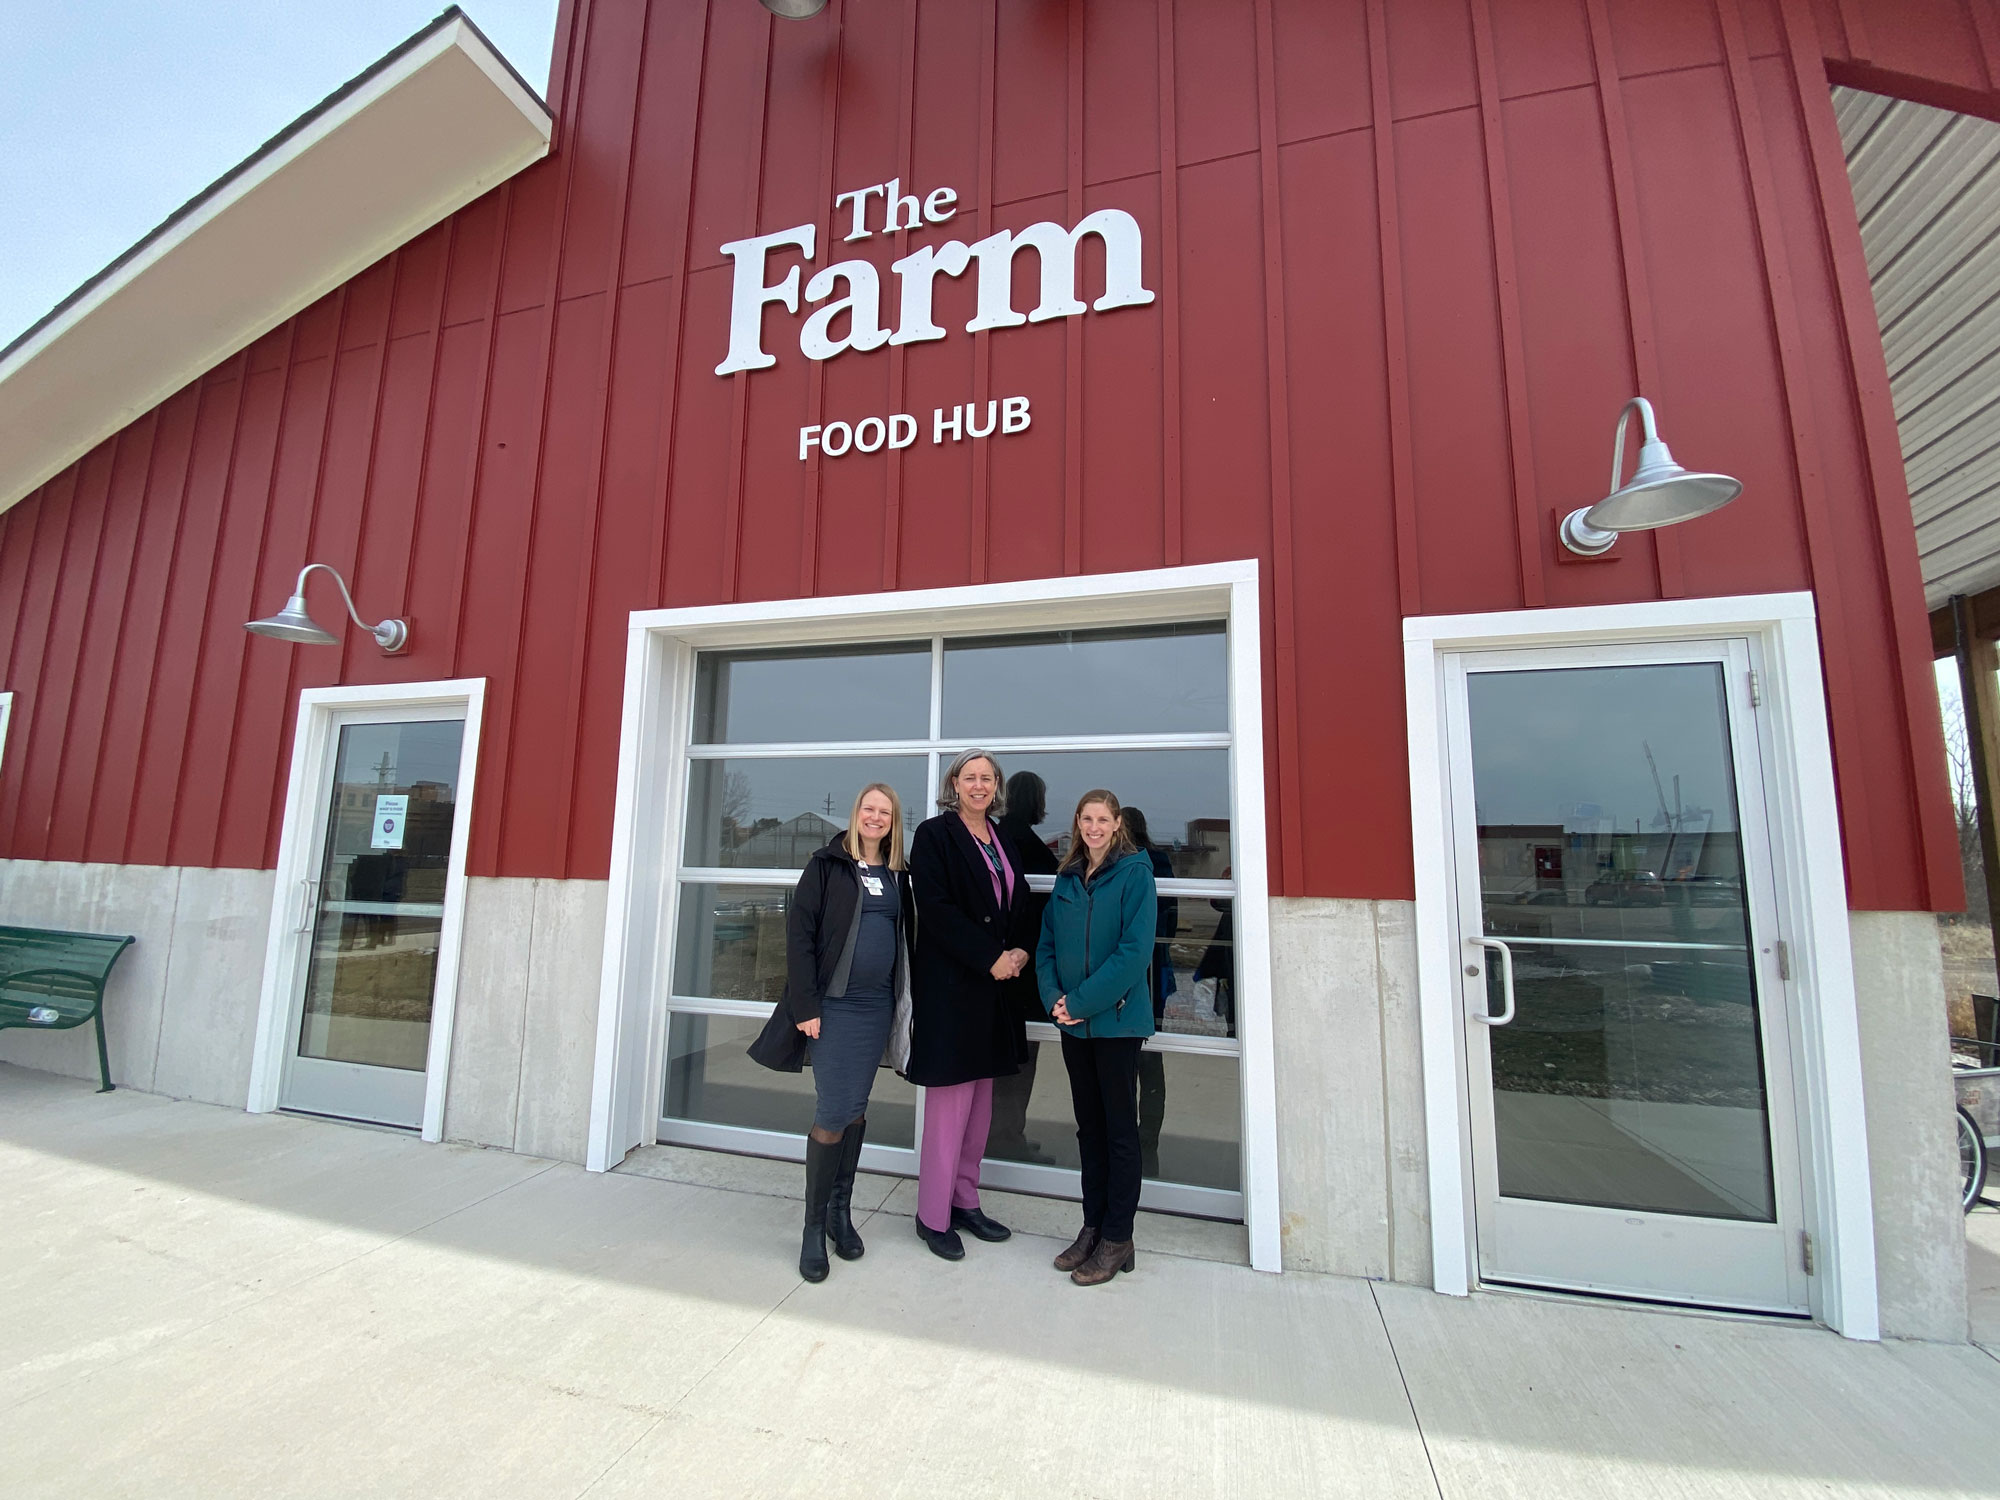 Amanda Sweetman, Stacy Dean, and Jae Gerhart stand in front of a building that has a sign on it that reads: The Farm – Food Hub